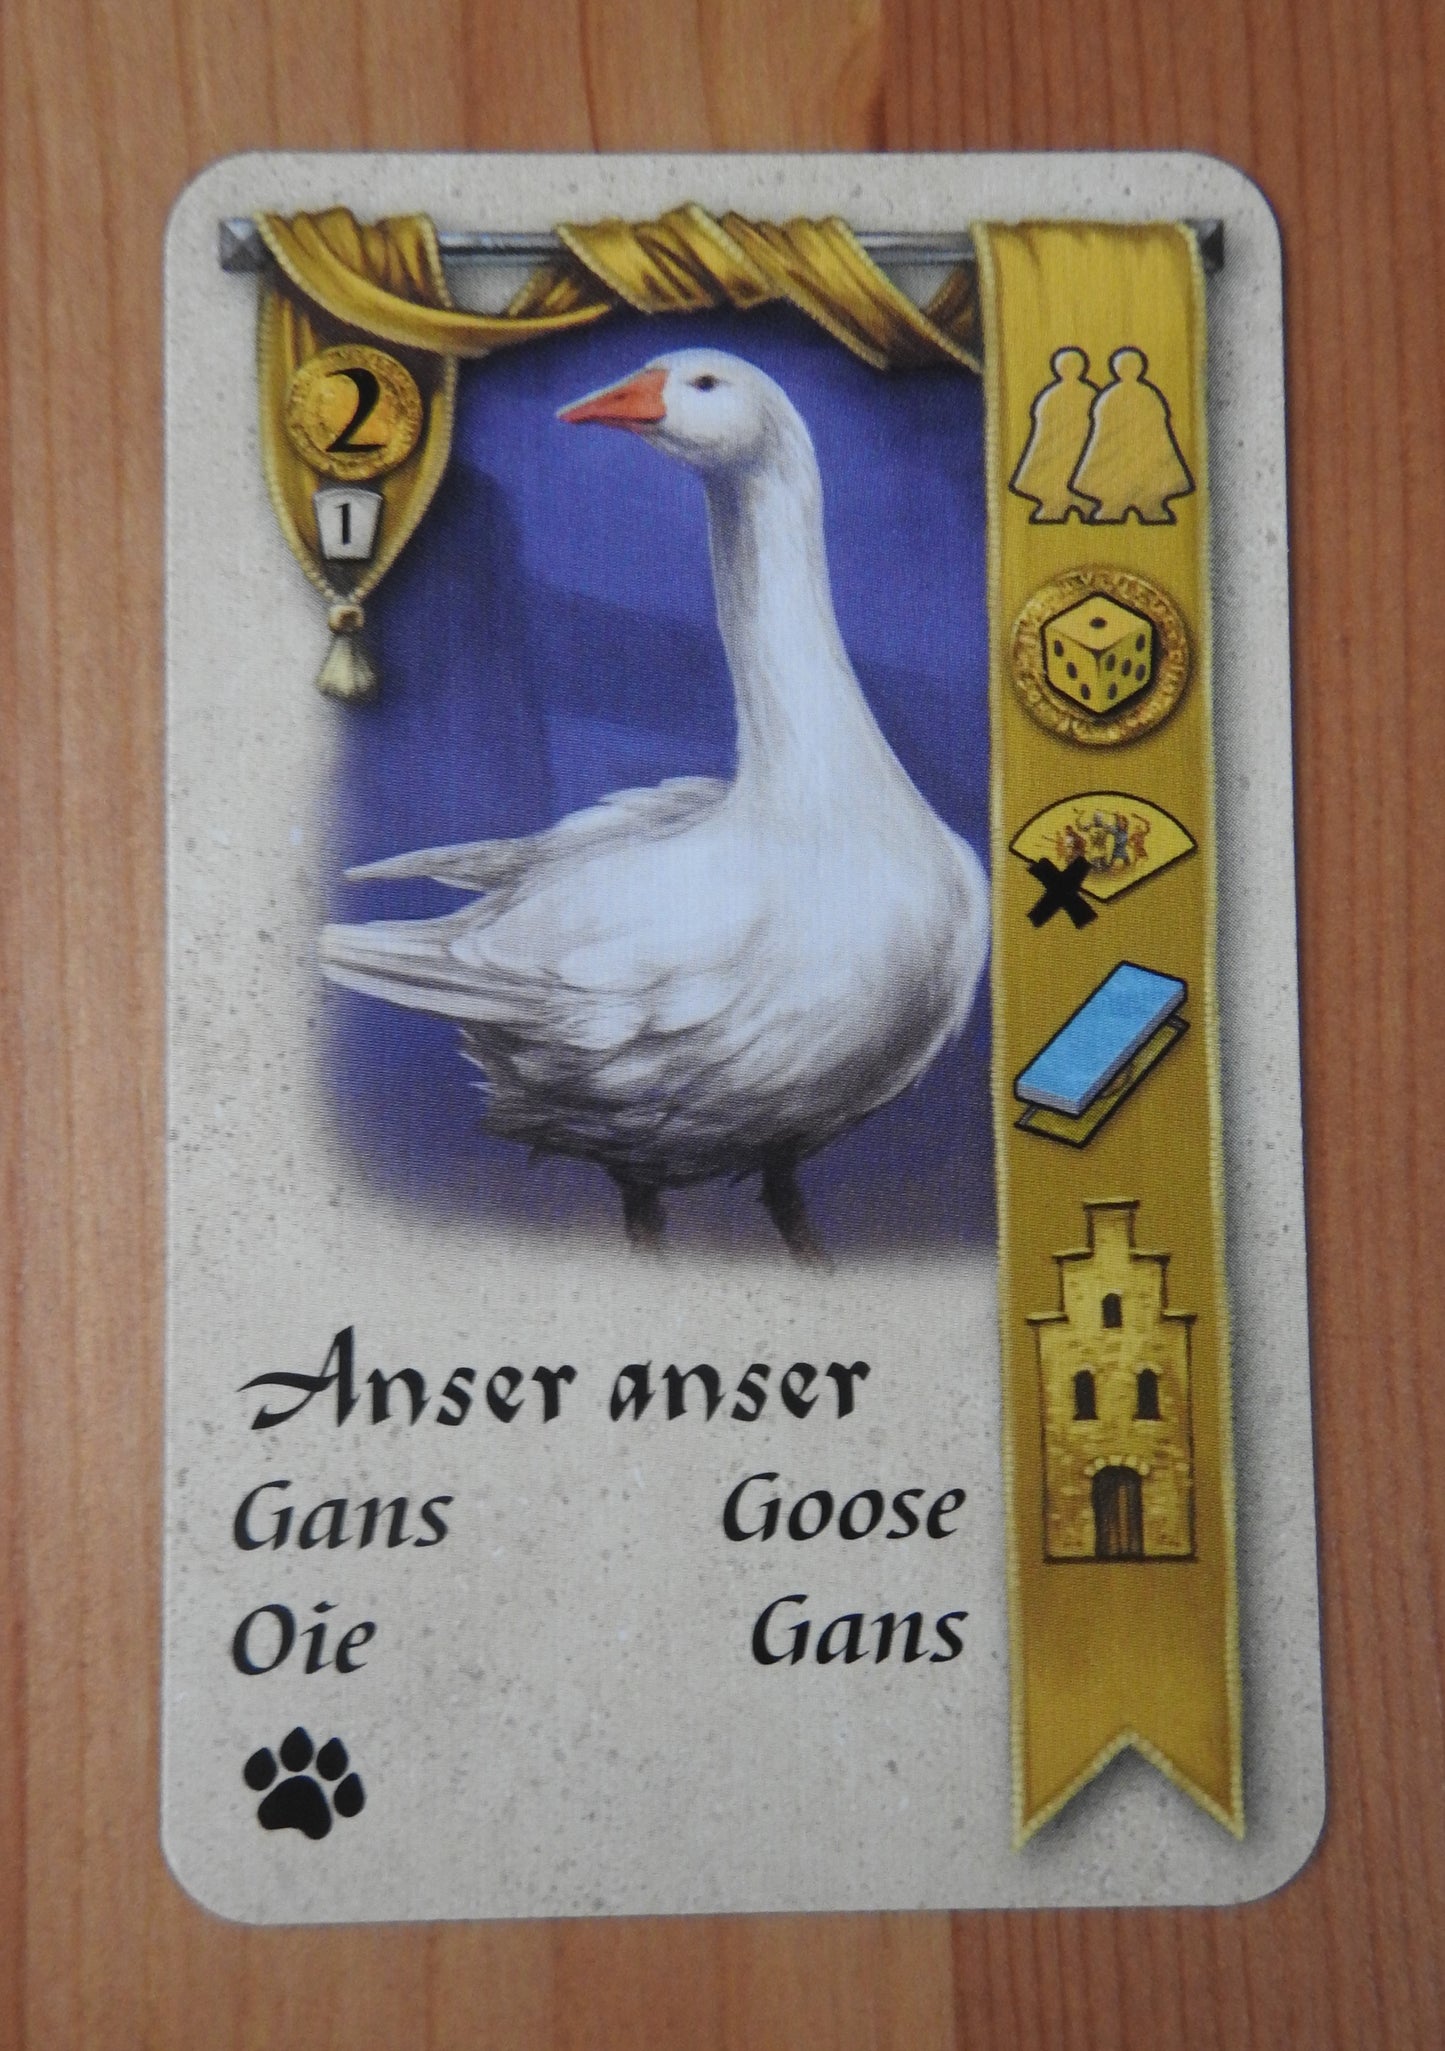 Close-up view of the goose card.